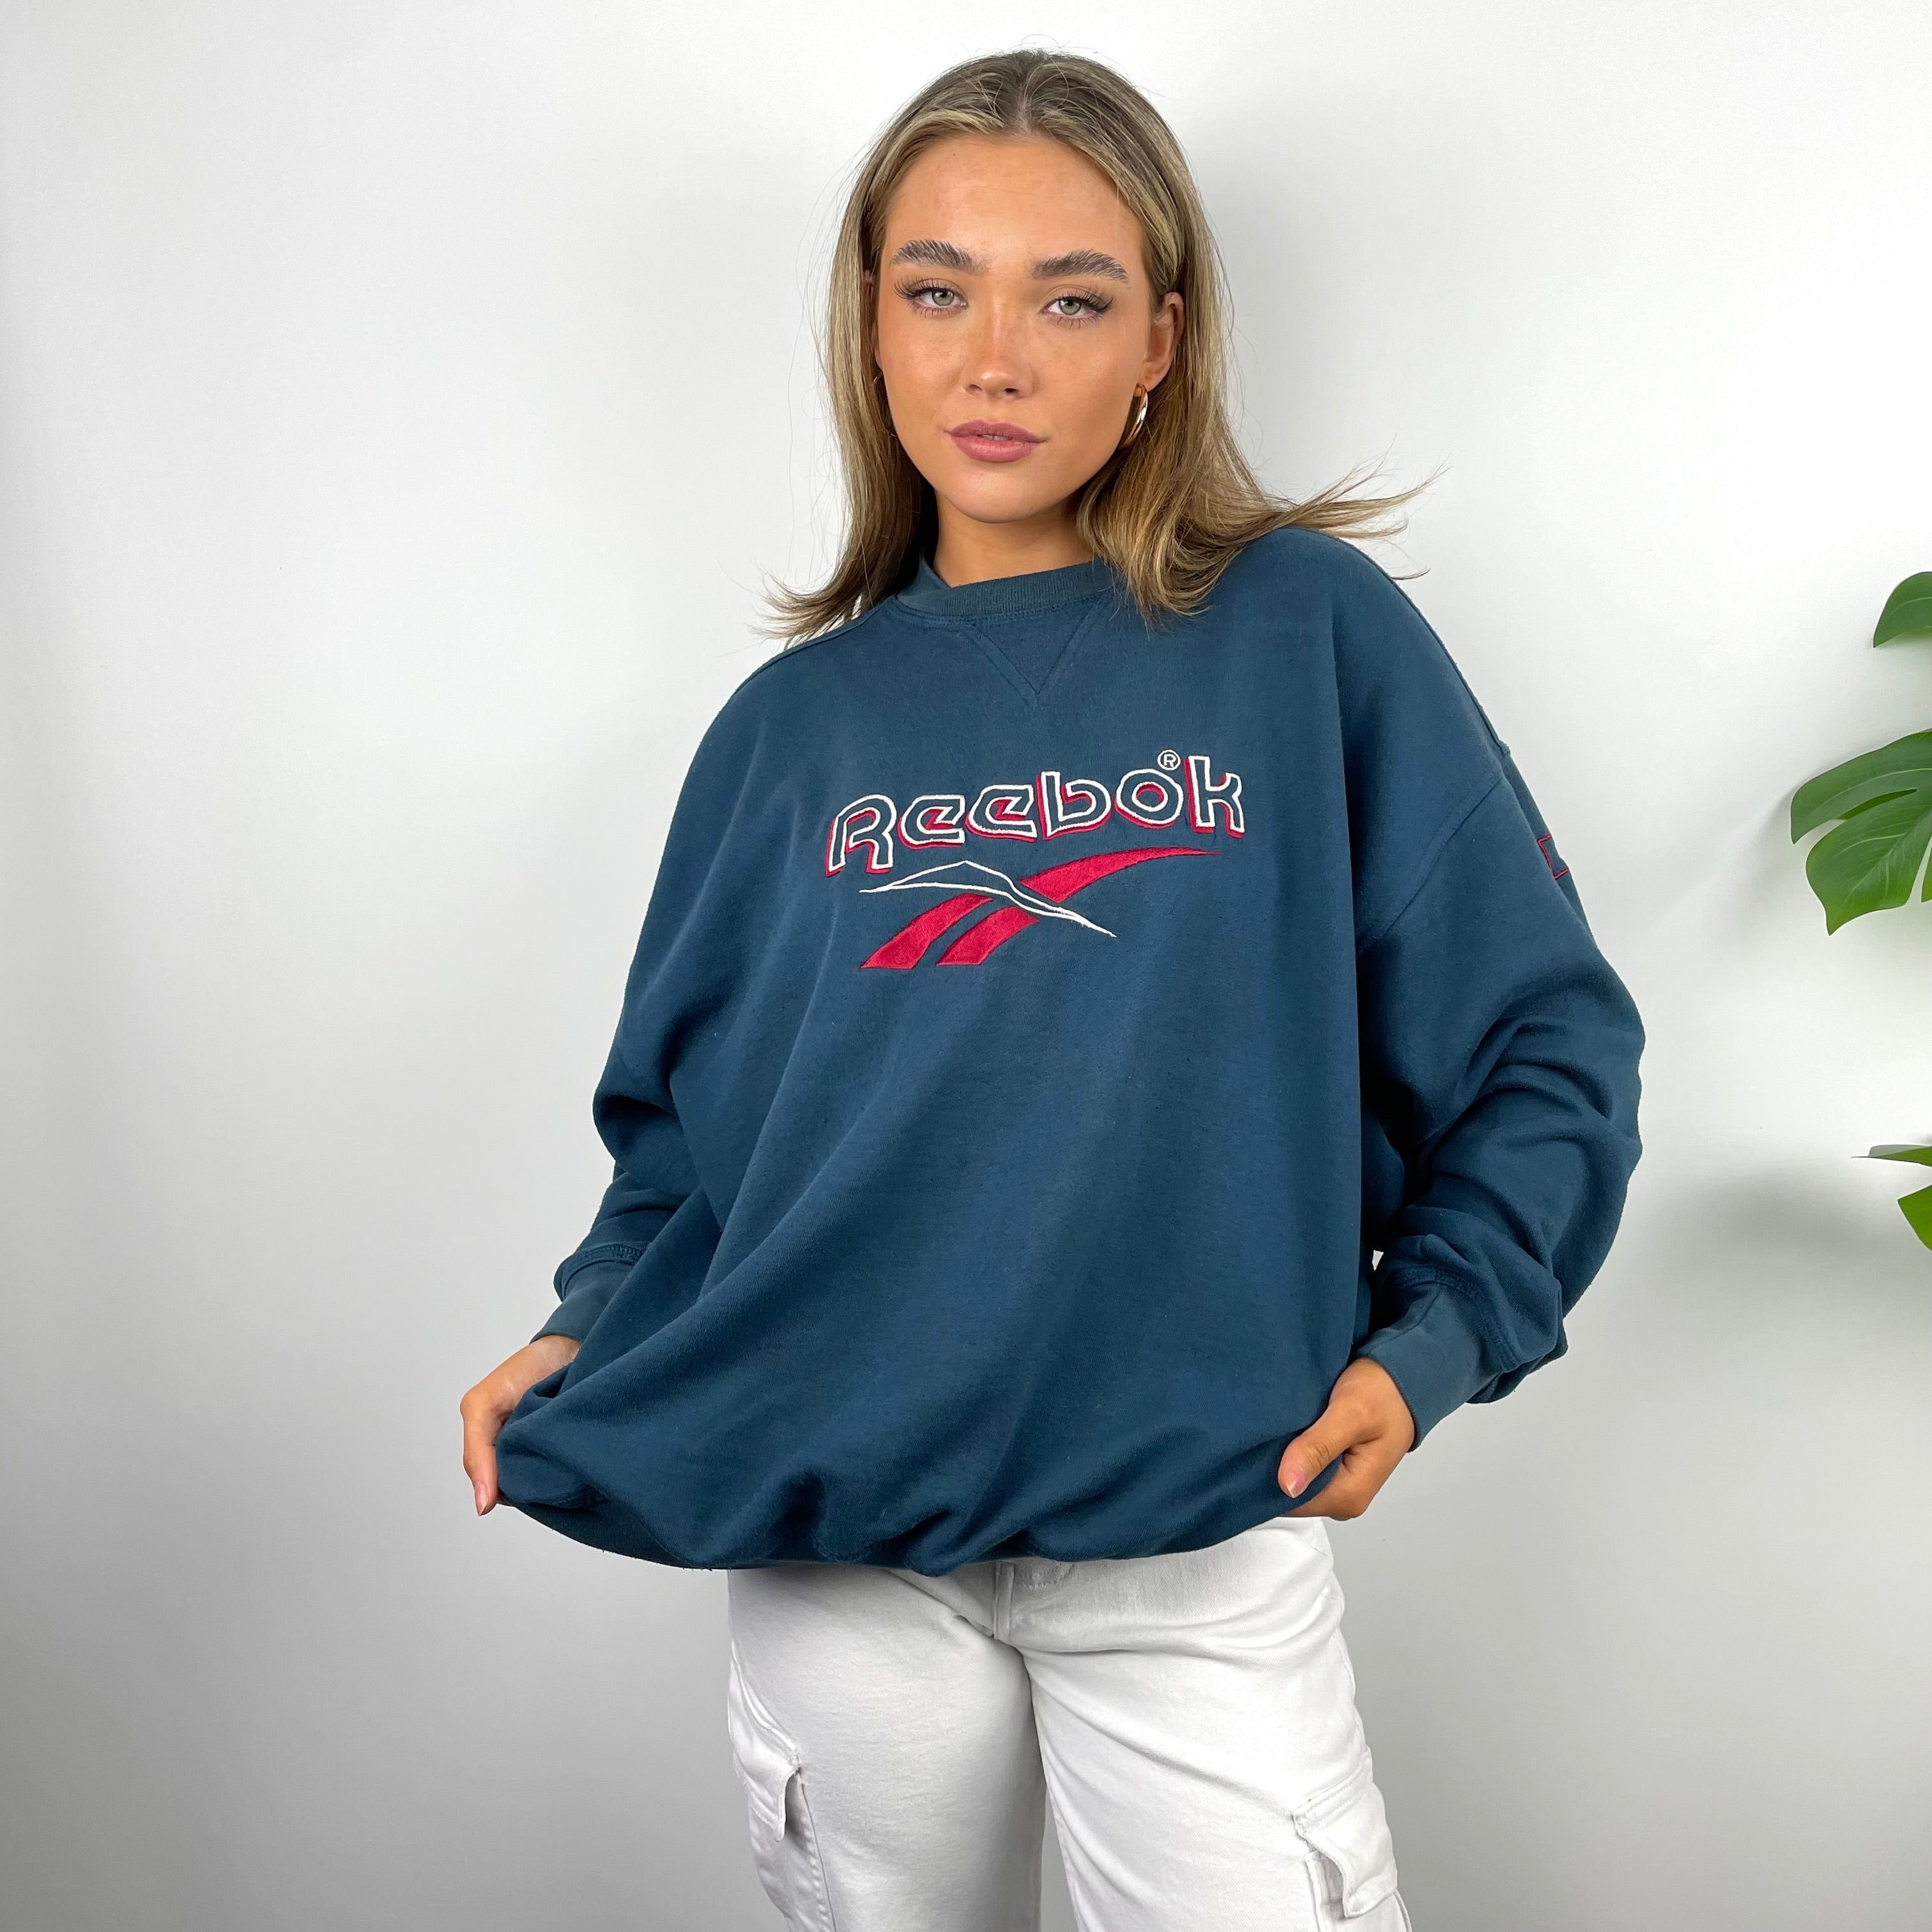 Reebok Turquoise Embroidered Spell Out Sweatshirt (M)